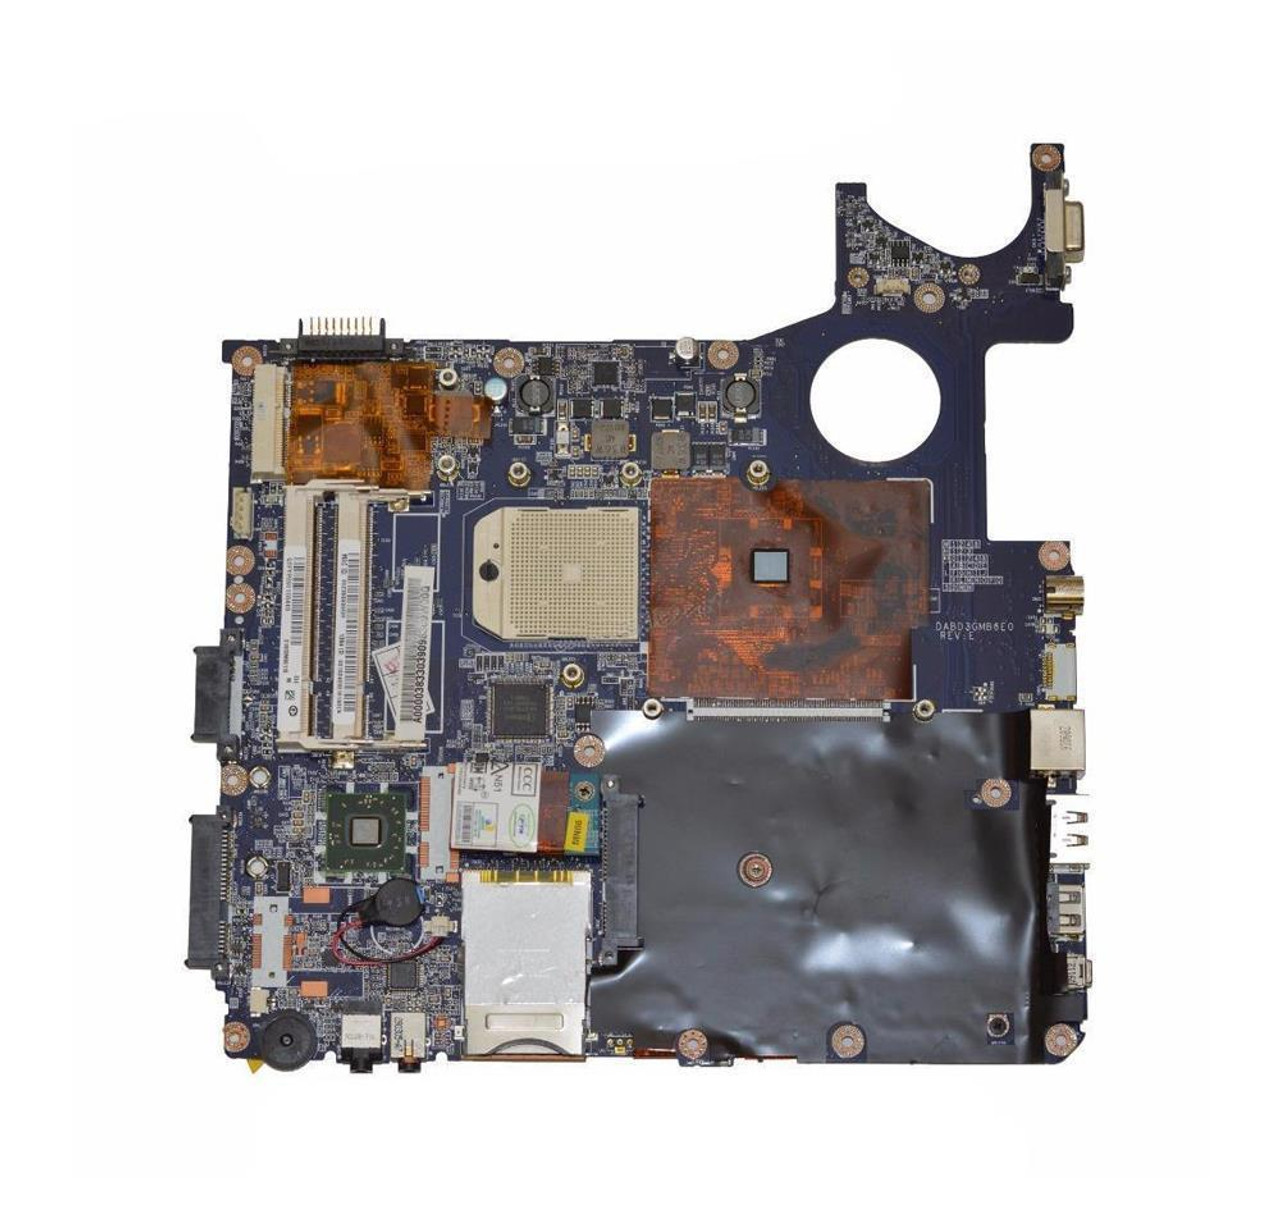 A000038120 Toshiba System Board (Motherboard) for Satellite P305D (Refurbished)